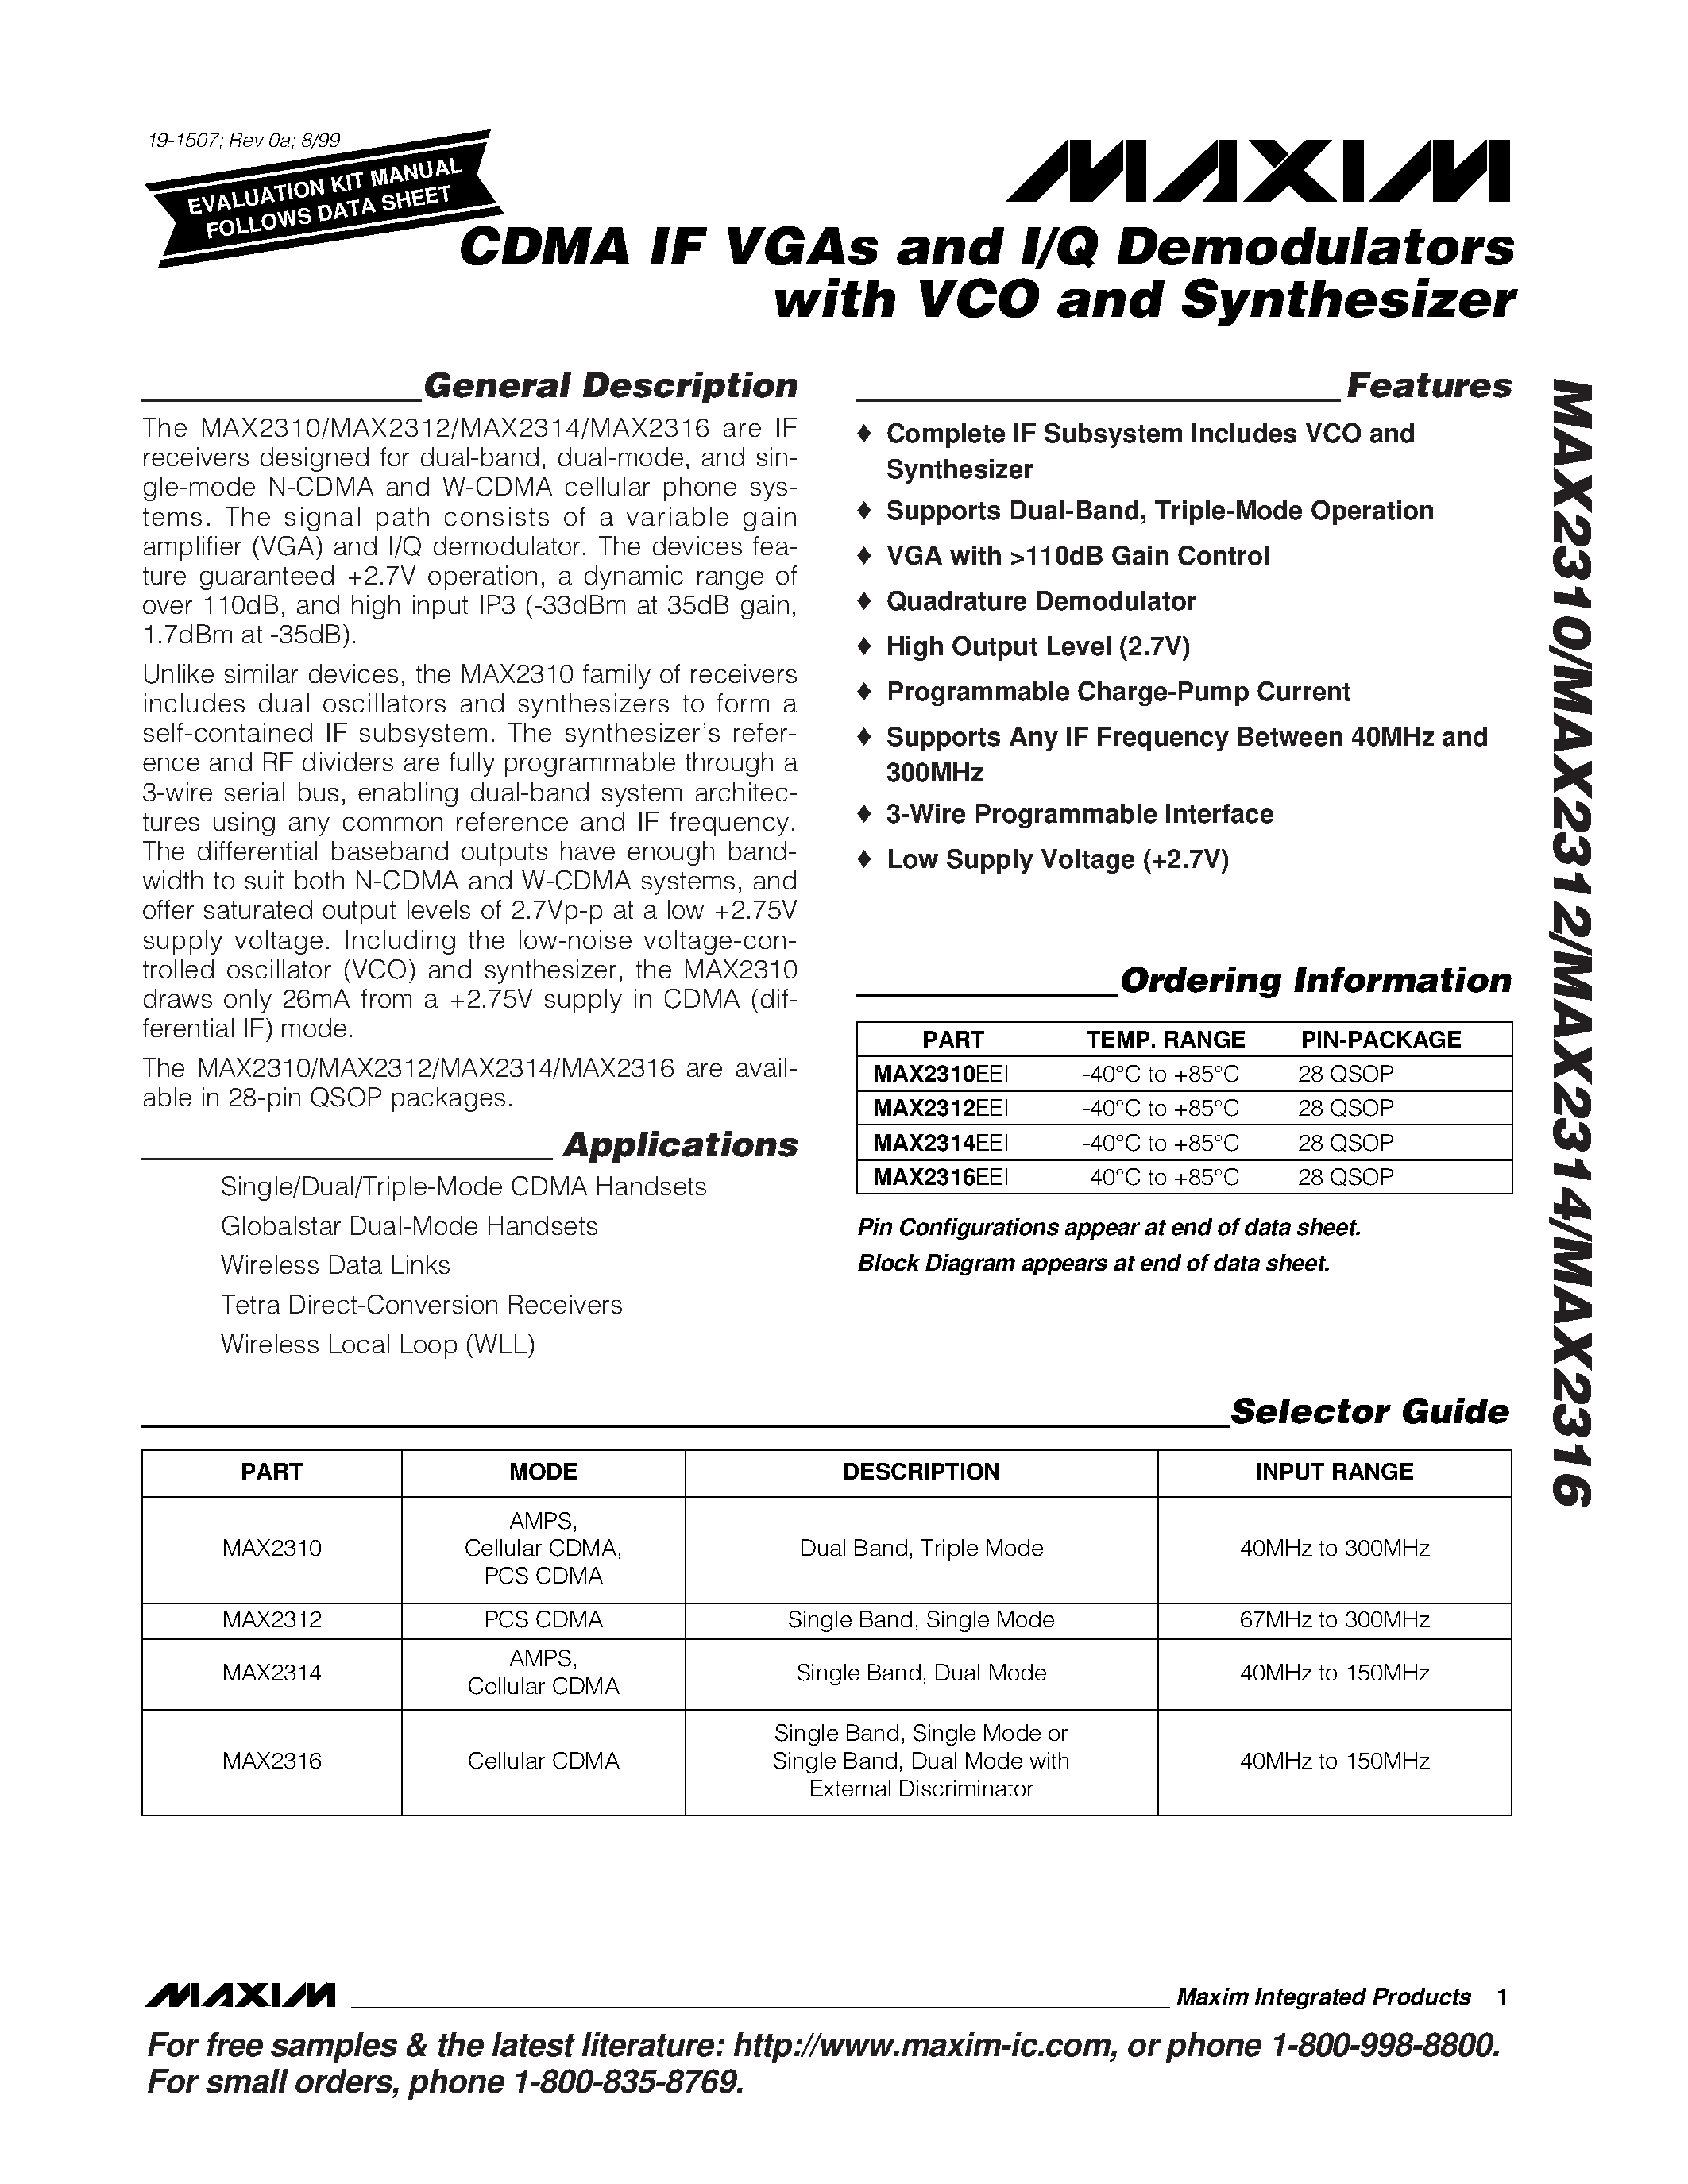 Datasheet MAX2314EEI - CDMA IF VGAs and I/Q Demodulators with VCO and Synthesizer page 1